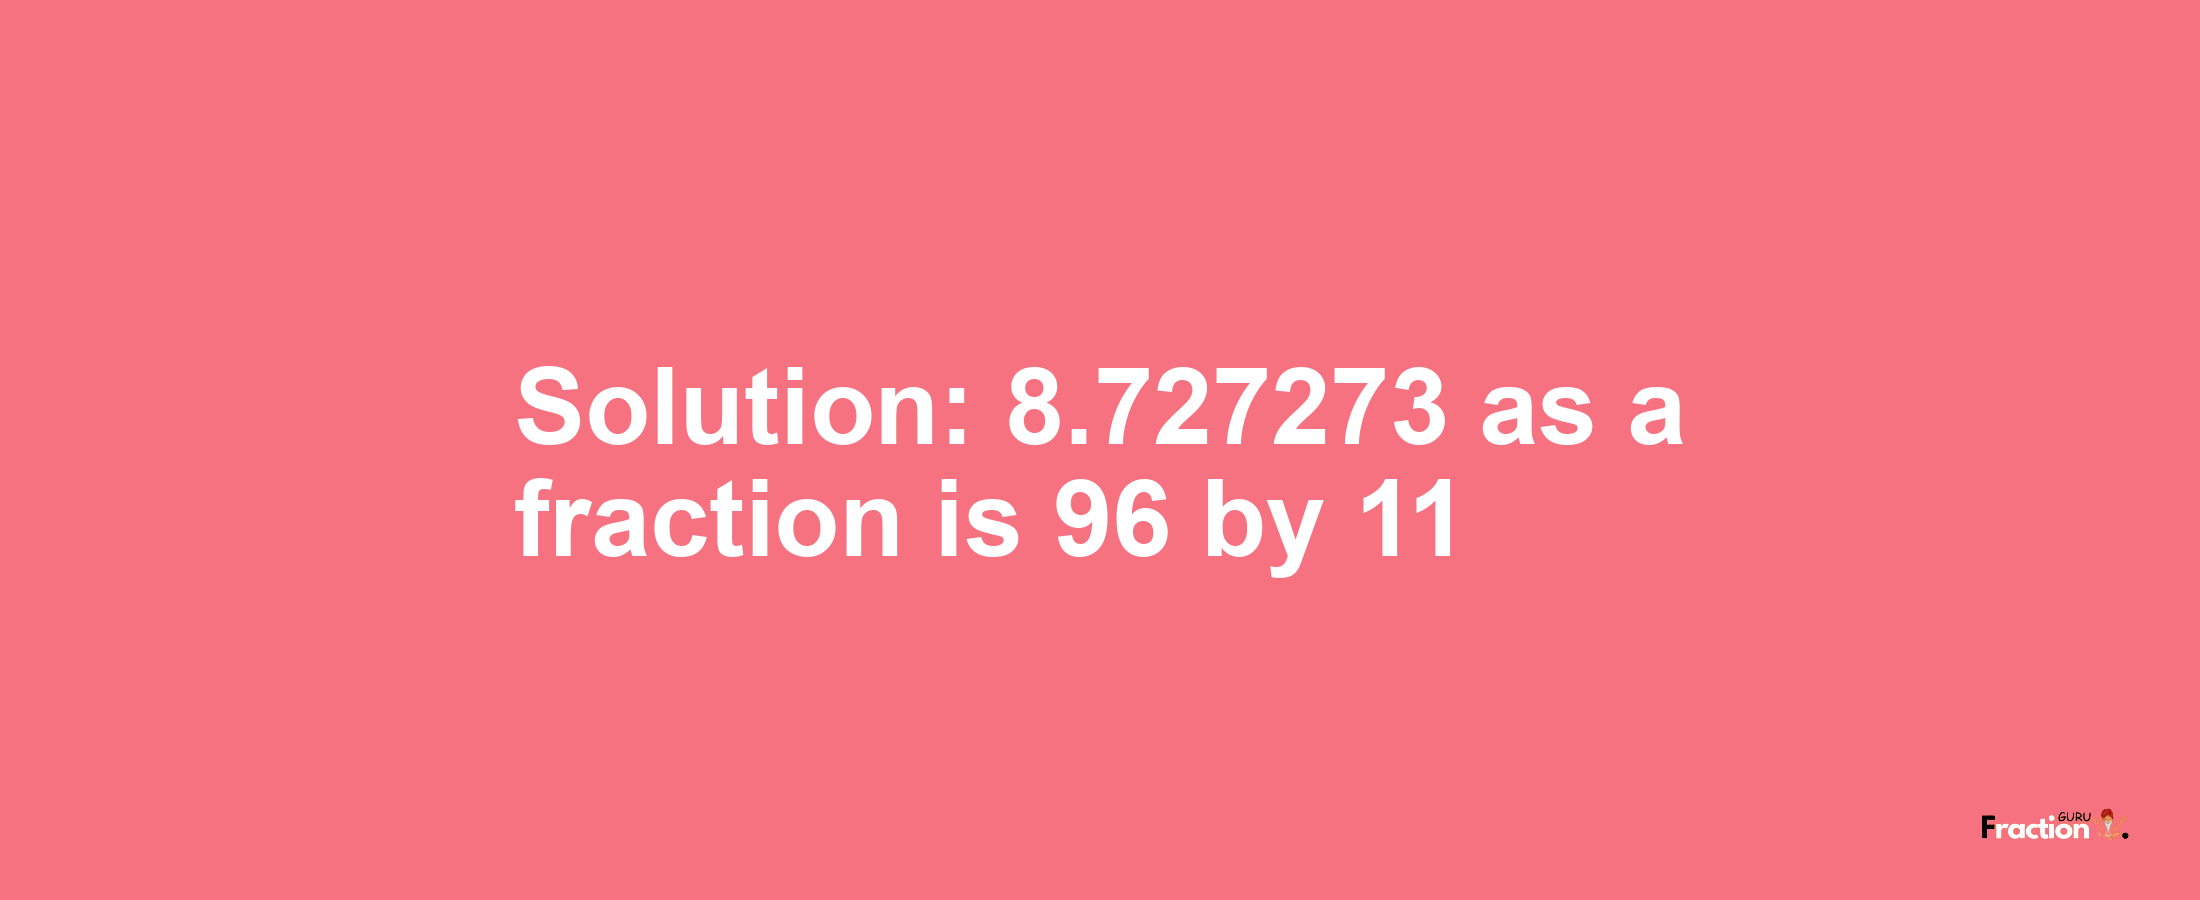 Solution:8.727273 as a fraction is 96/11